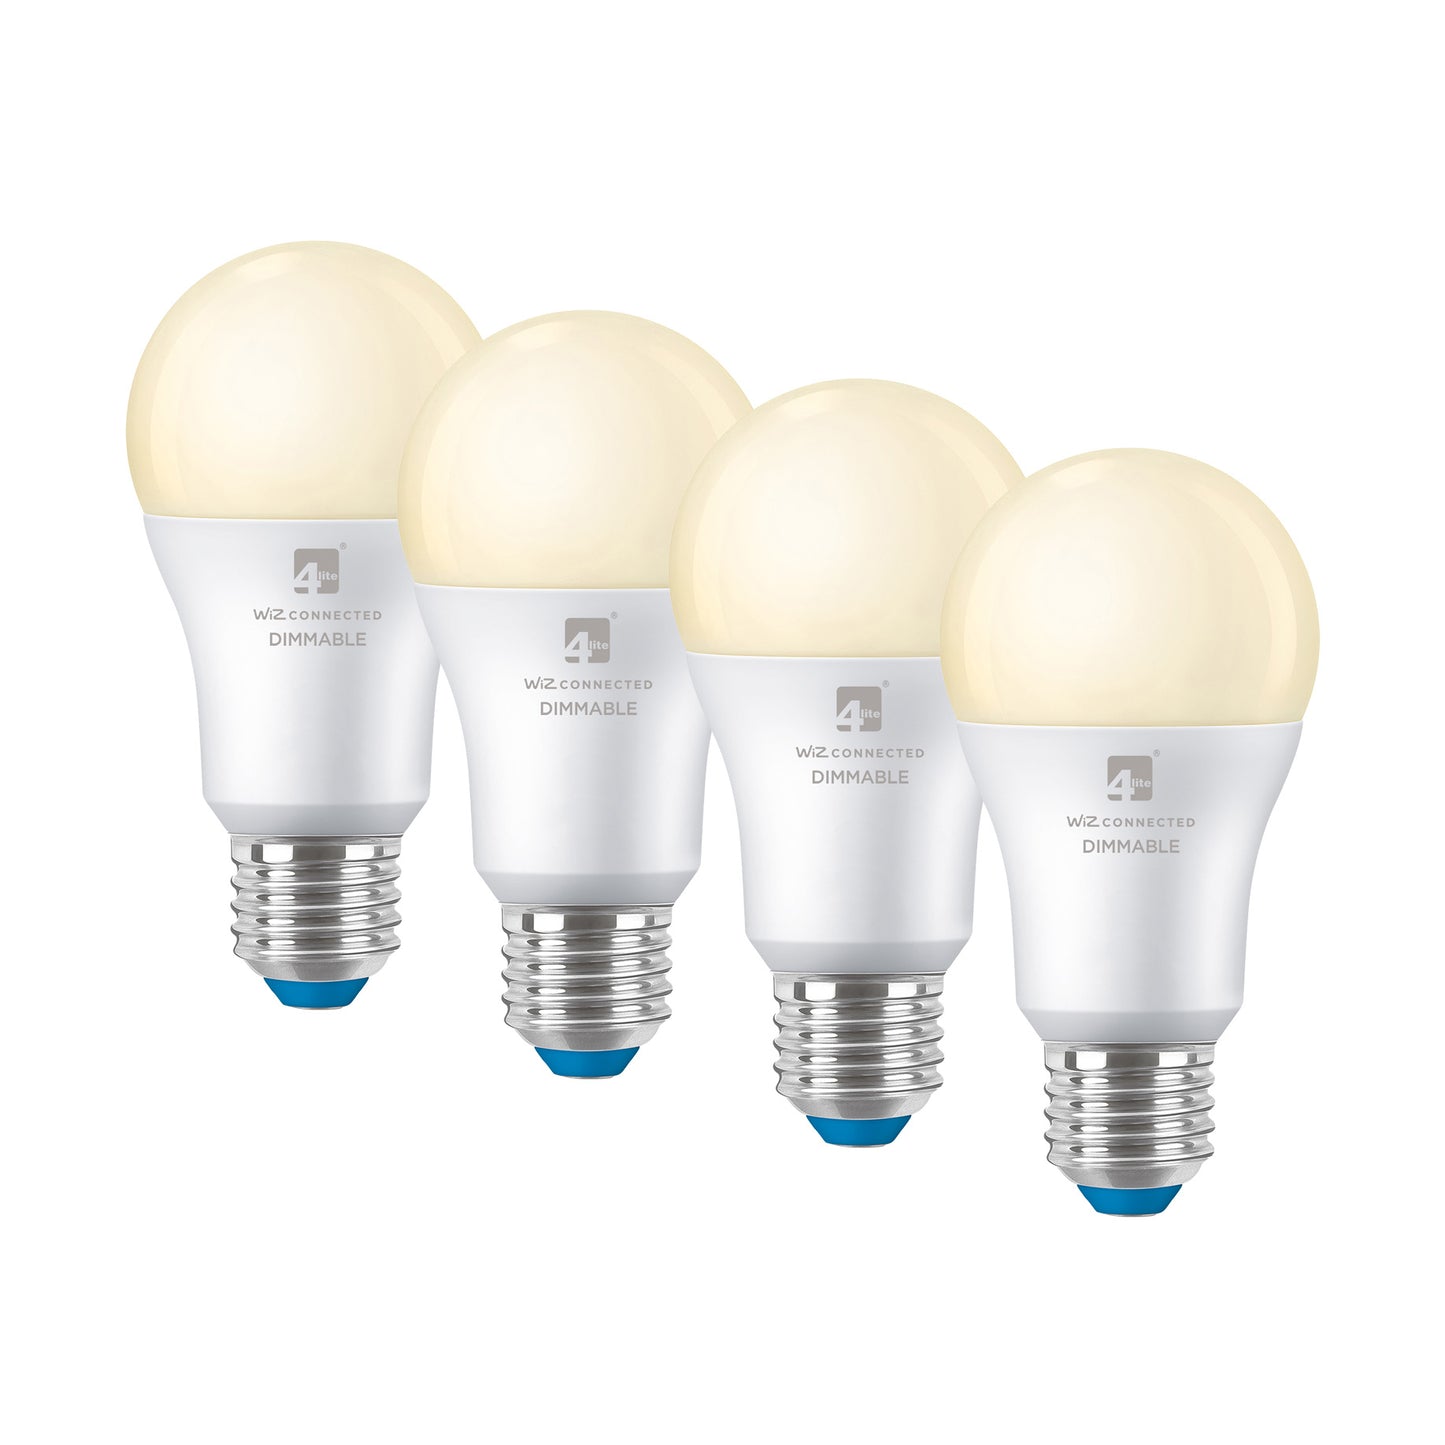 4lite WiZ Connected A60 Warm White WiFi LED Smart Bulb - E27 Large Screw, Pack of 4 - maplin.co.uk